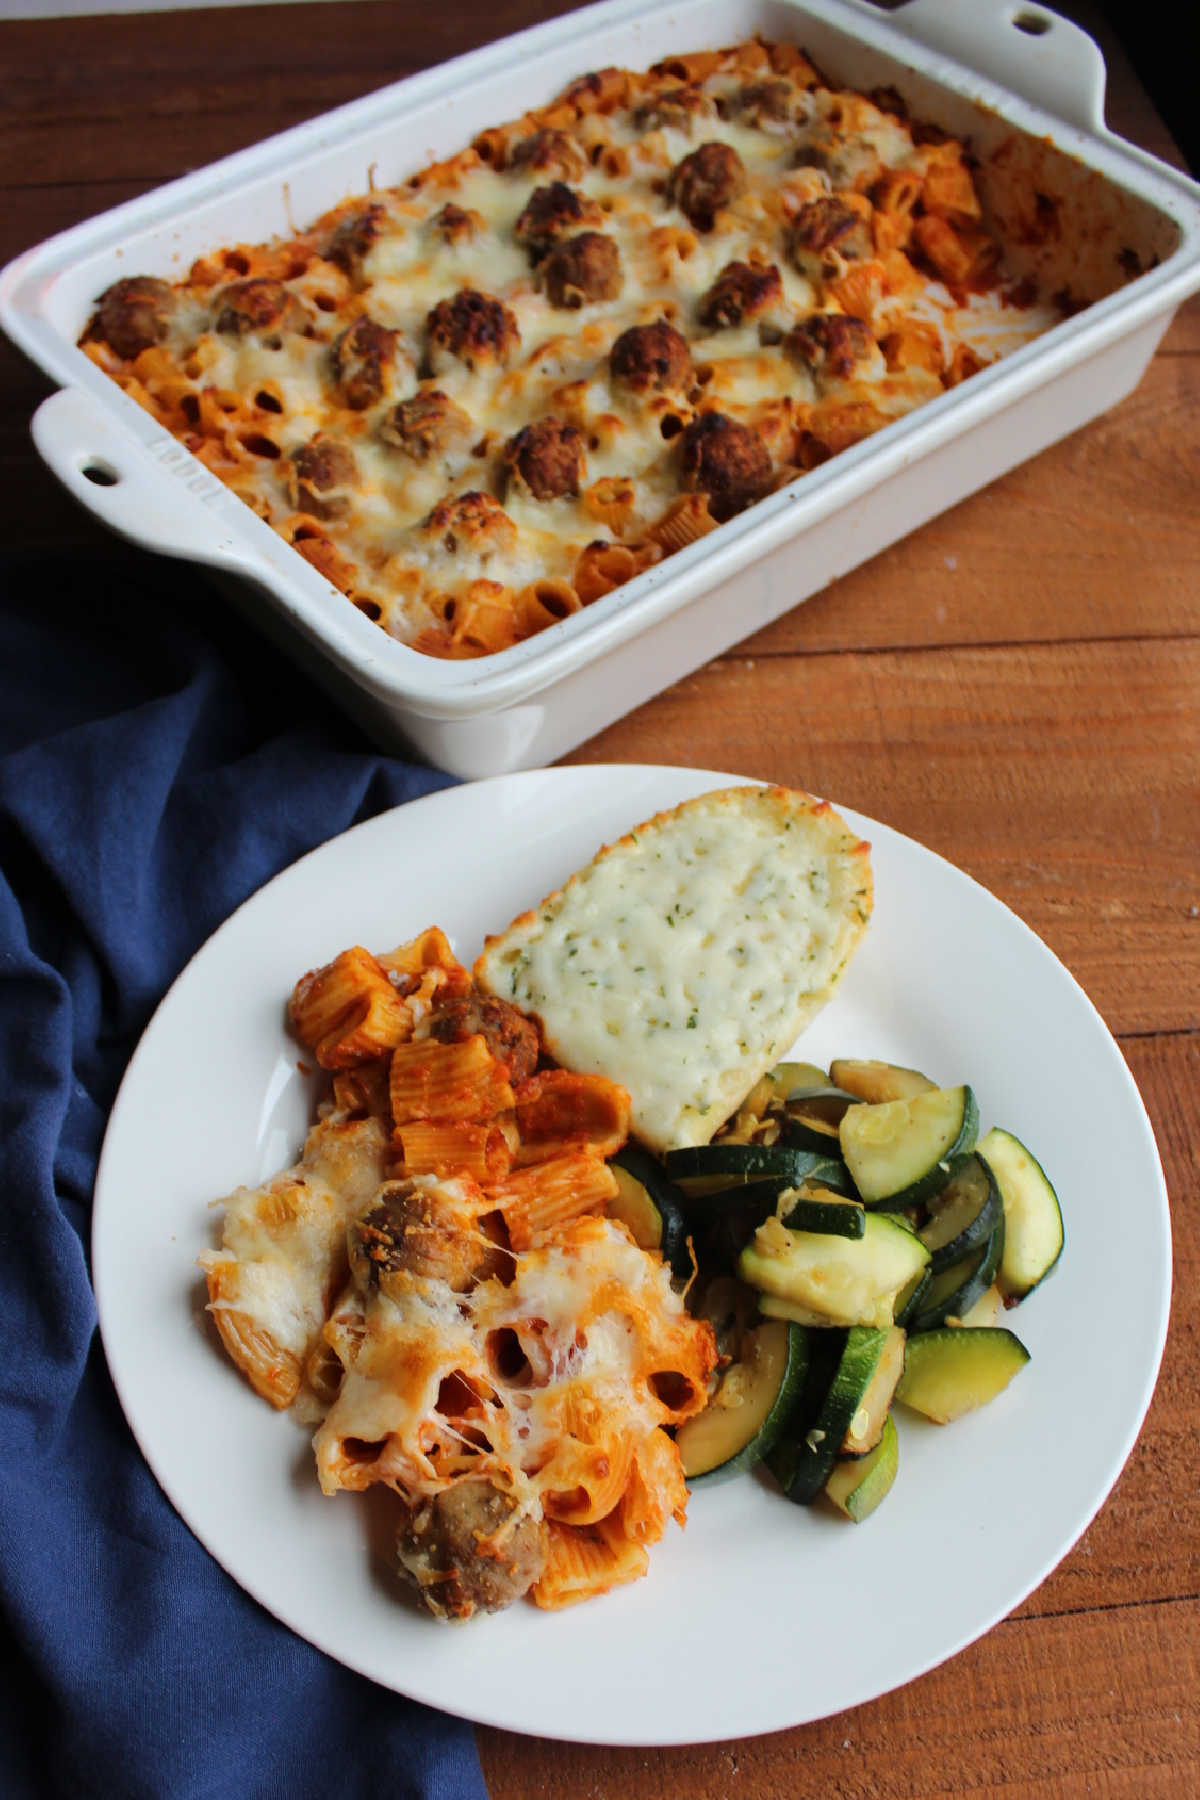 Plate of rigatoni and meatball casserole with garlic bread and zucchini next to remaining casserole.